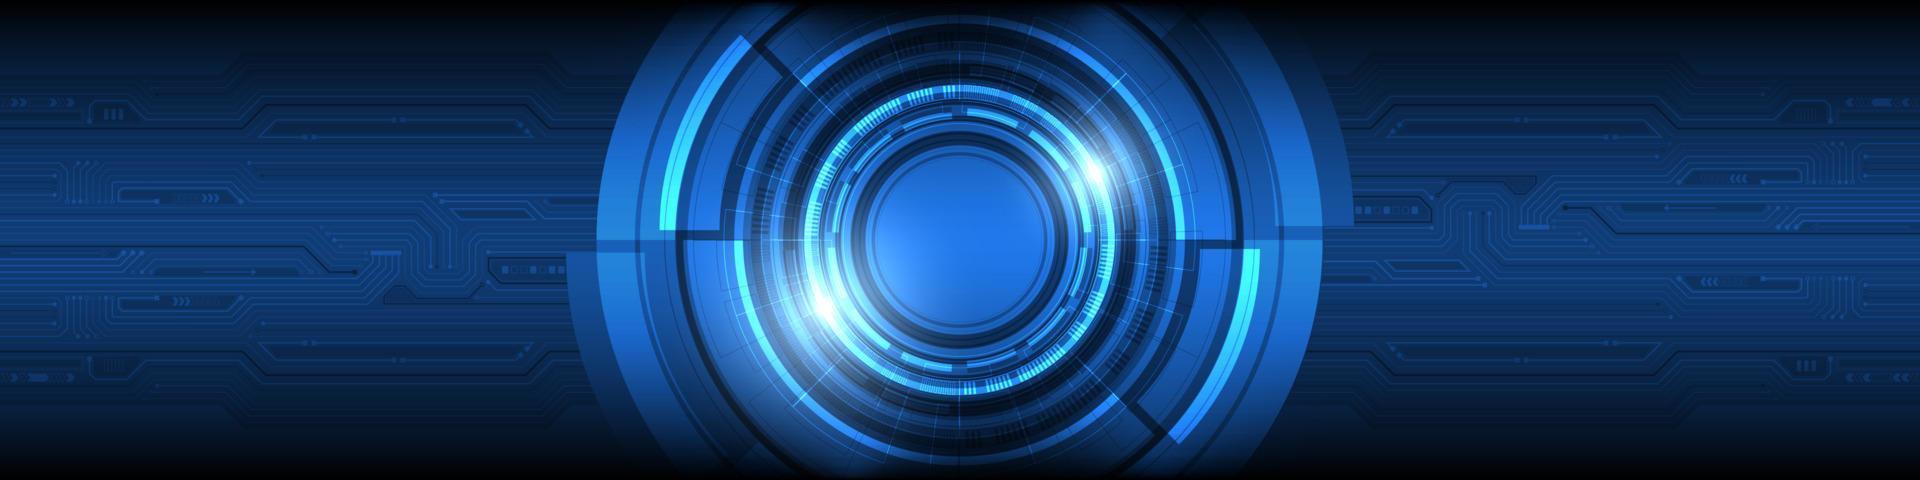 Abstract overlap circle digital background, smart lens technology, circuit board, arrow speed up vector